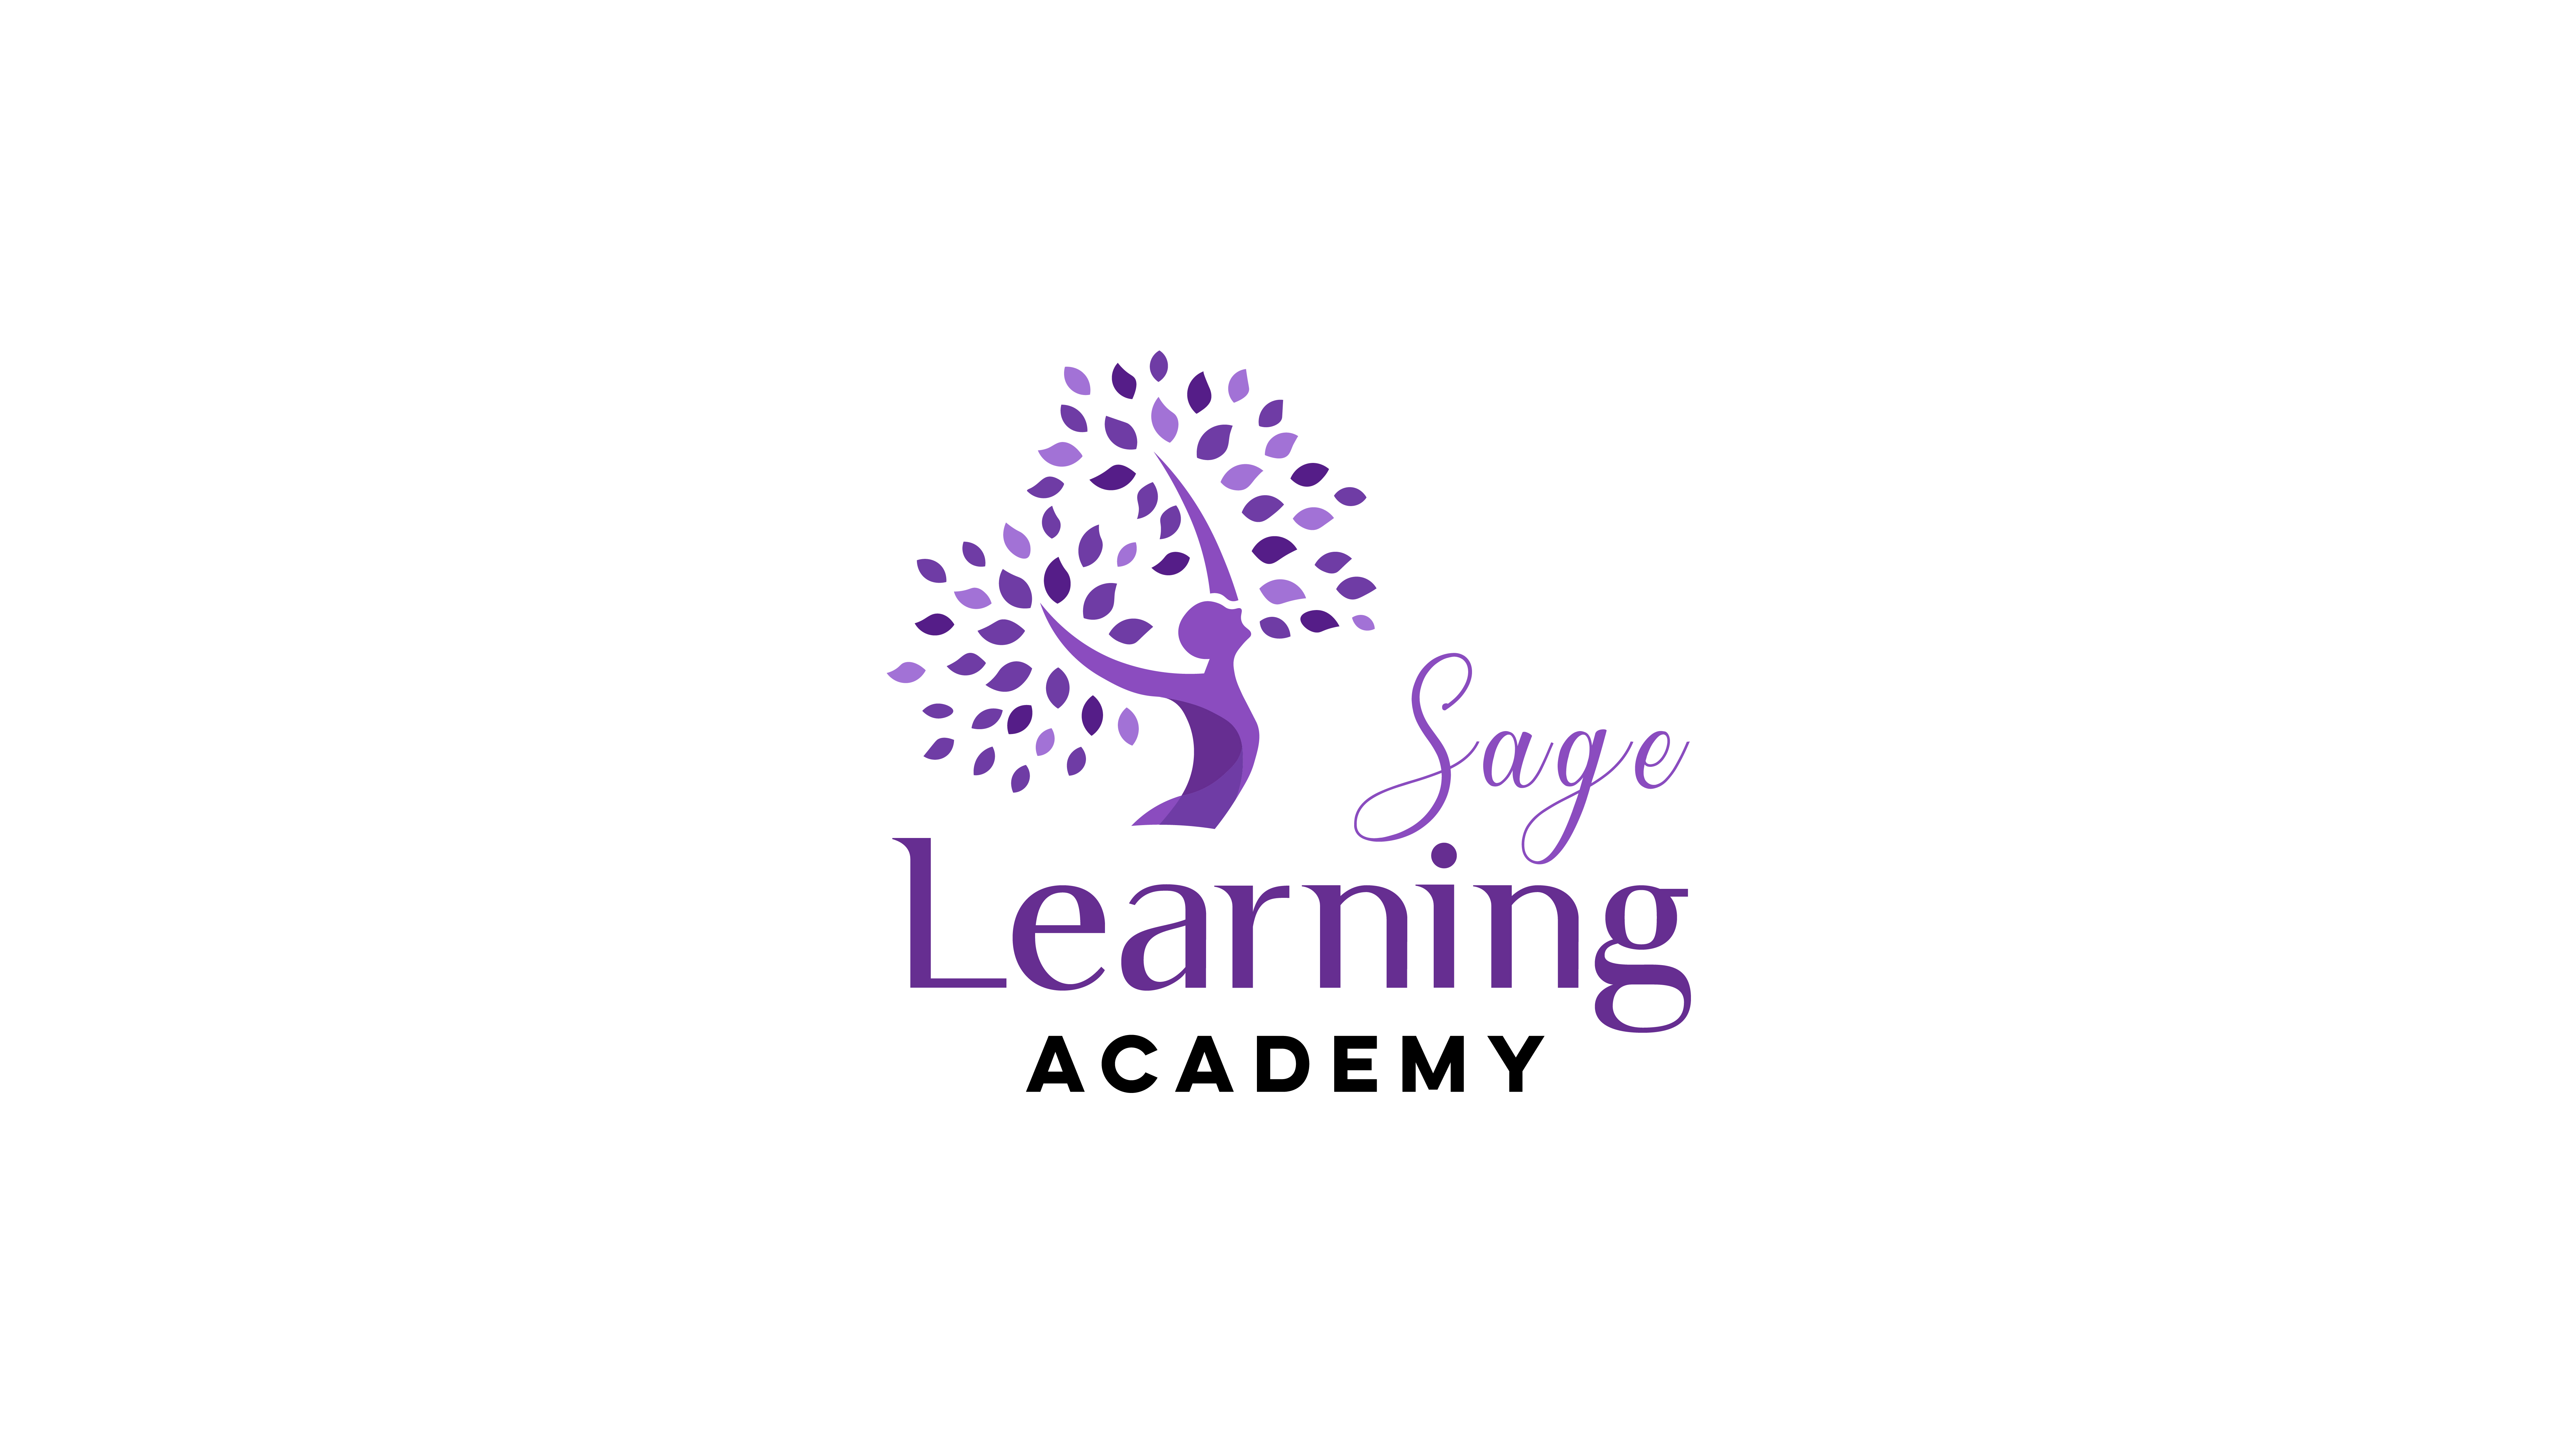 Sage Learning Academy